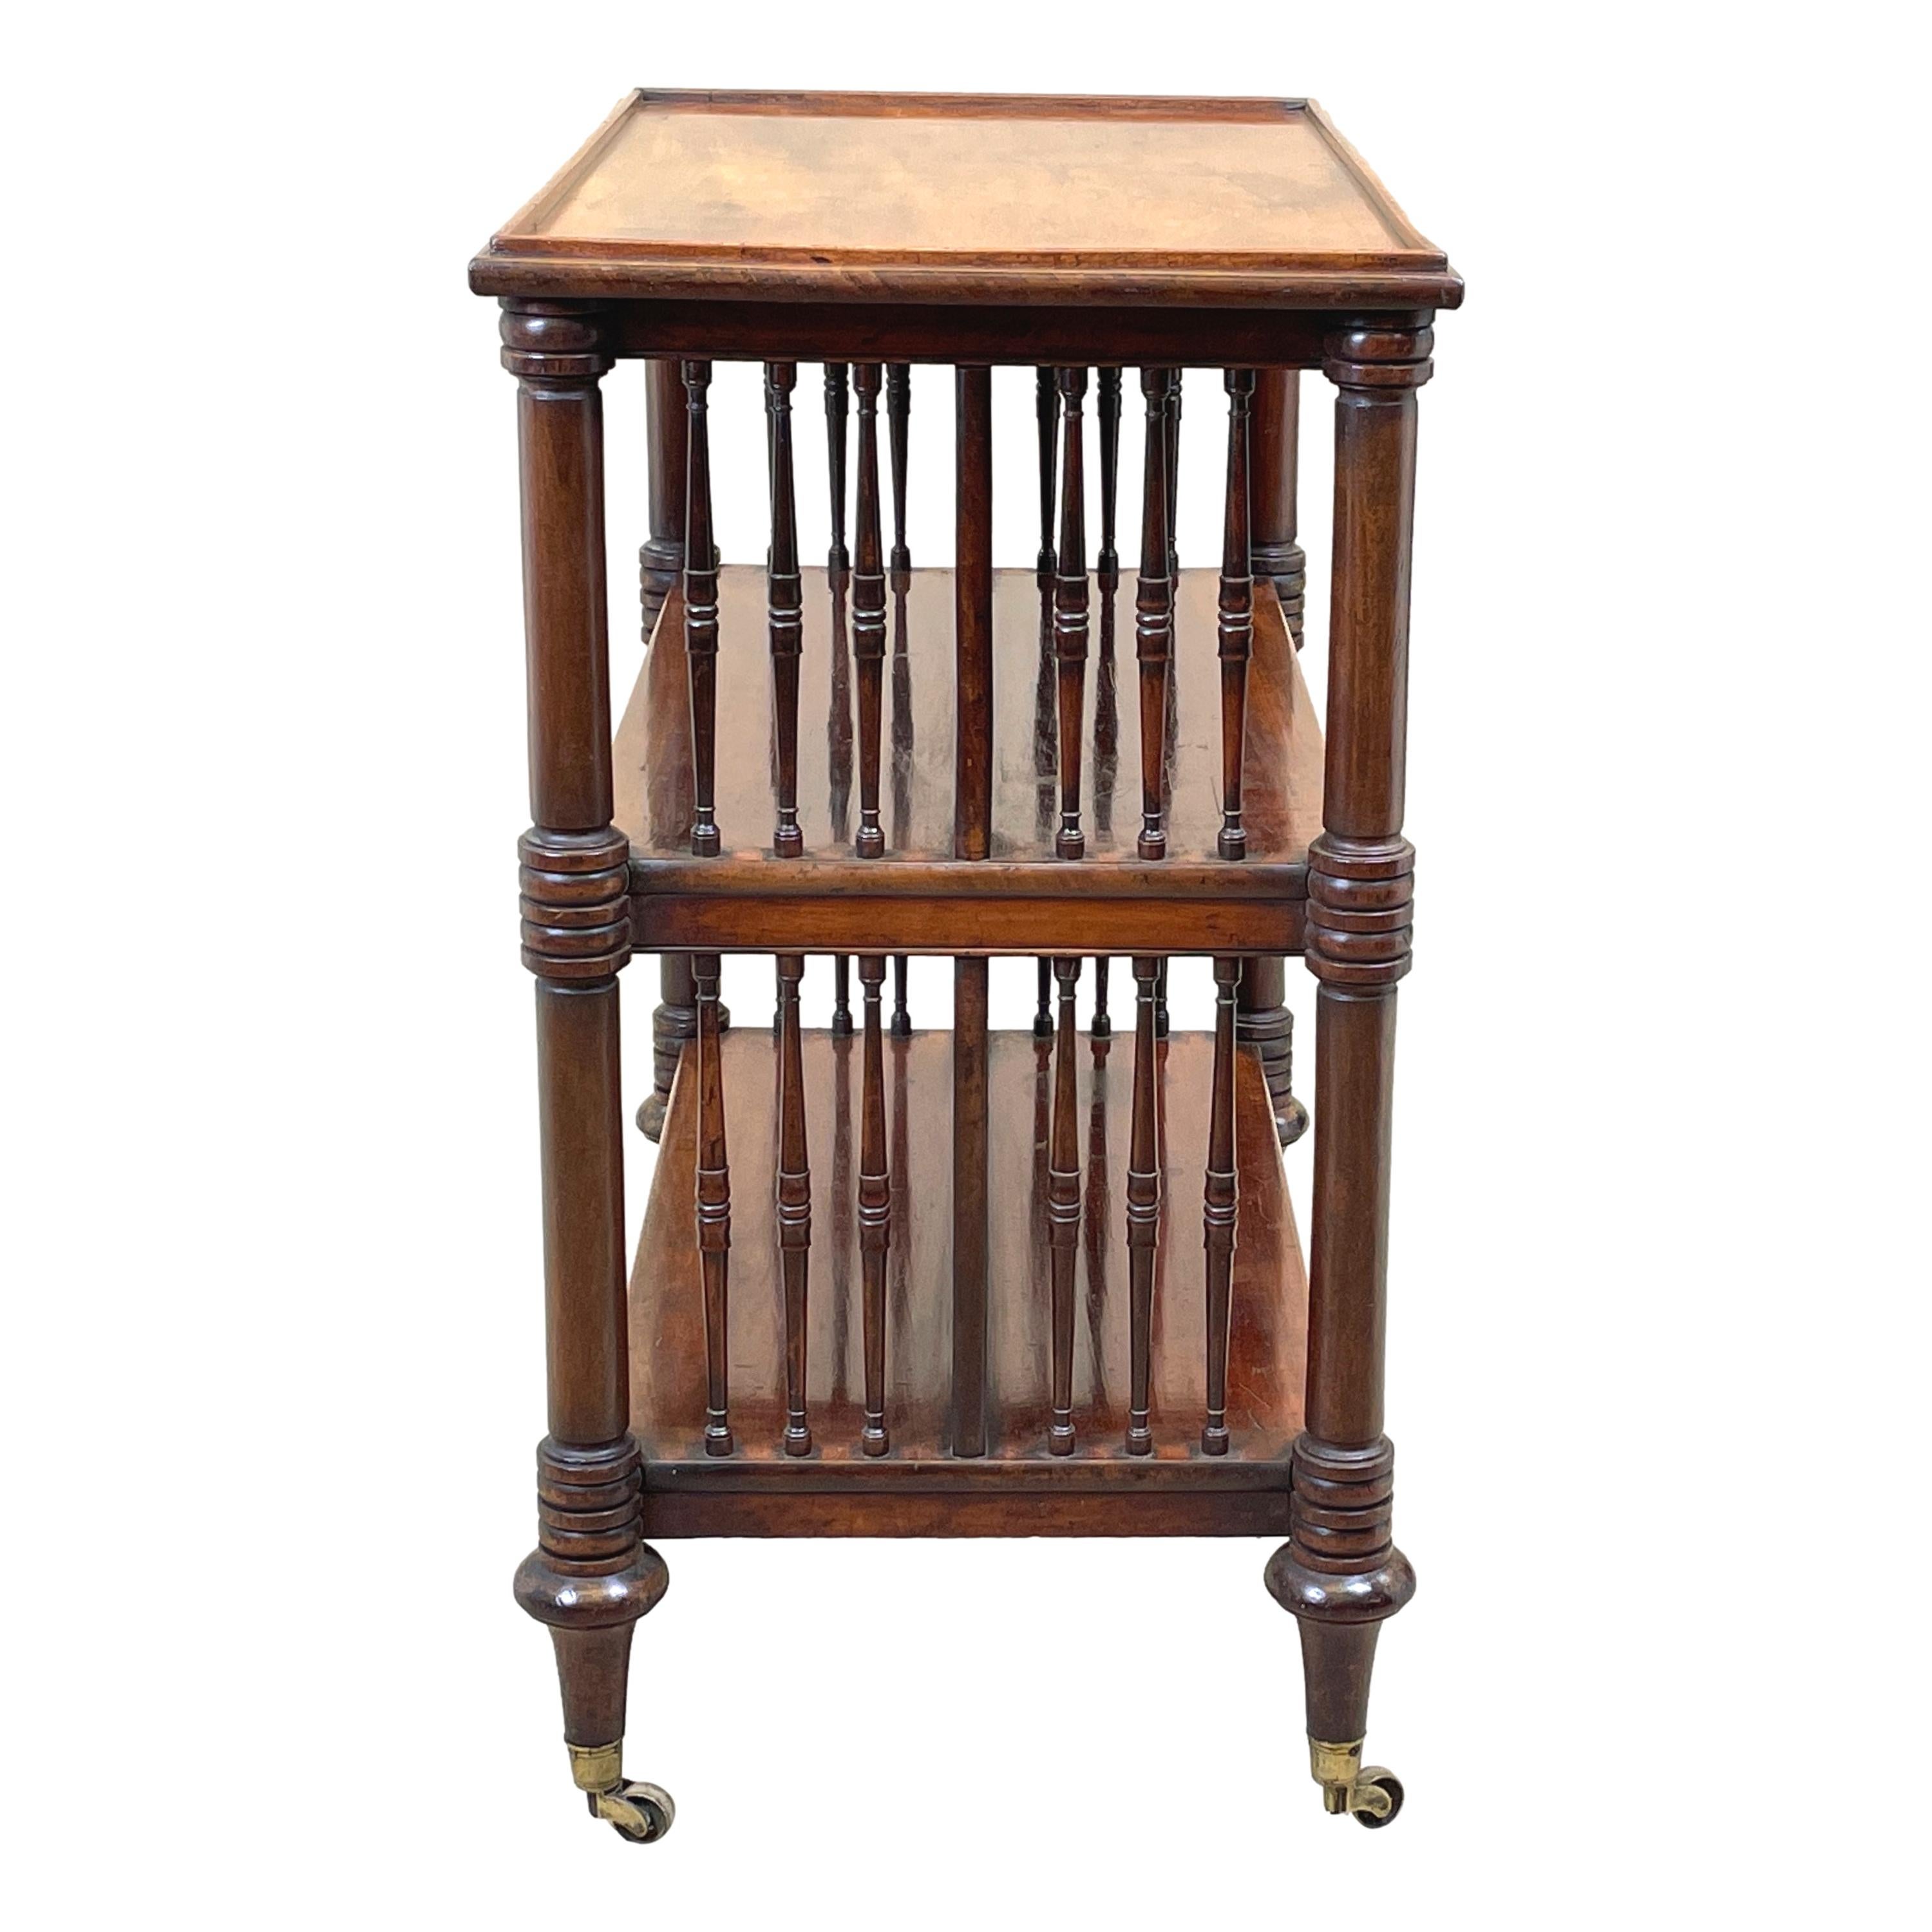 A very fine quality late regency period mahogany double sided open bookcase, or trolley, having well figured rectangular top with gallery mould, over two well figured further tiers with central divider and elegant spindle turned upright supports to